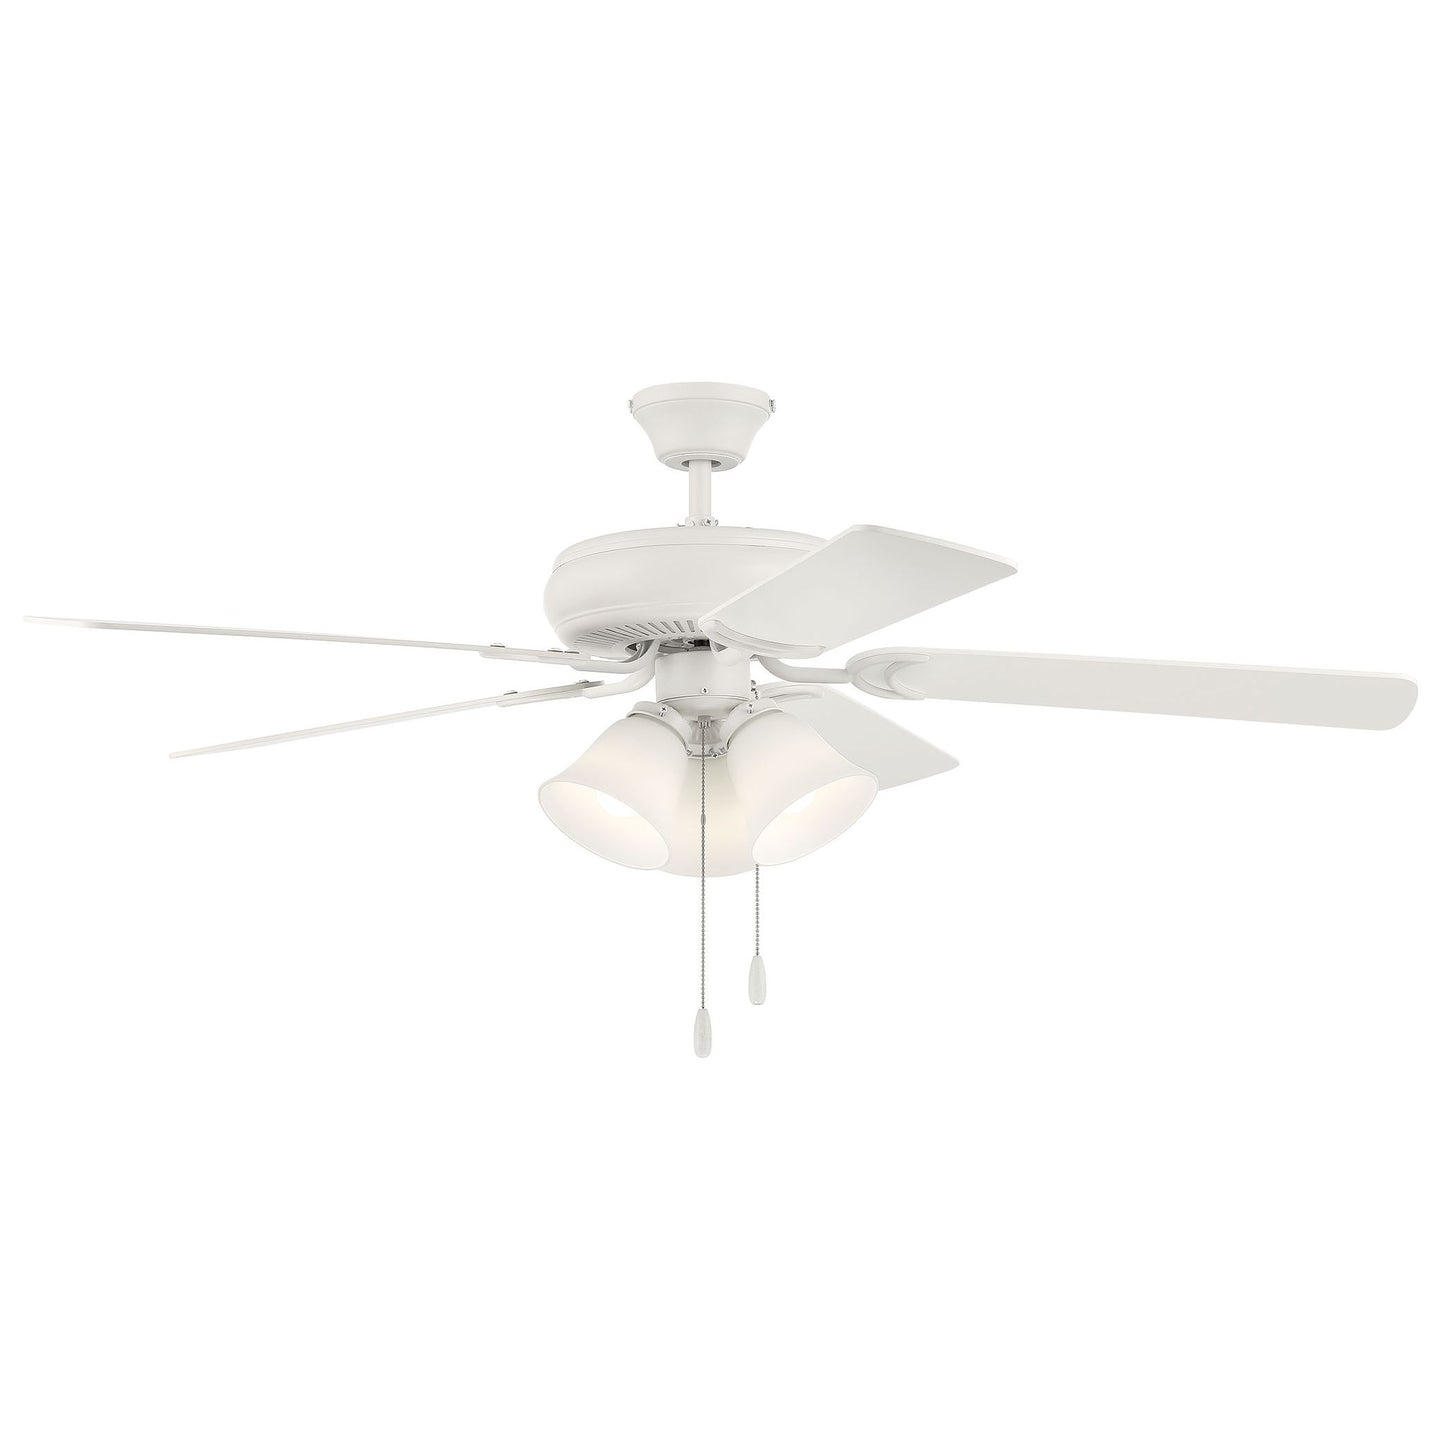 DCF52W5C3W - Decorator's Choice 52" 5 Blade Ceiling Fan with Light Kit - Pull Chain - Matte White